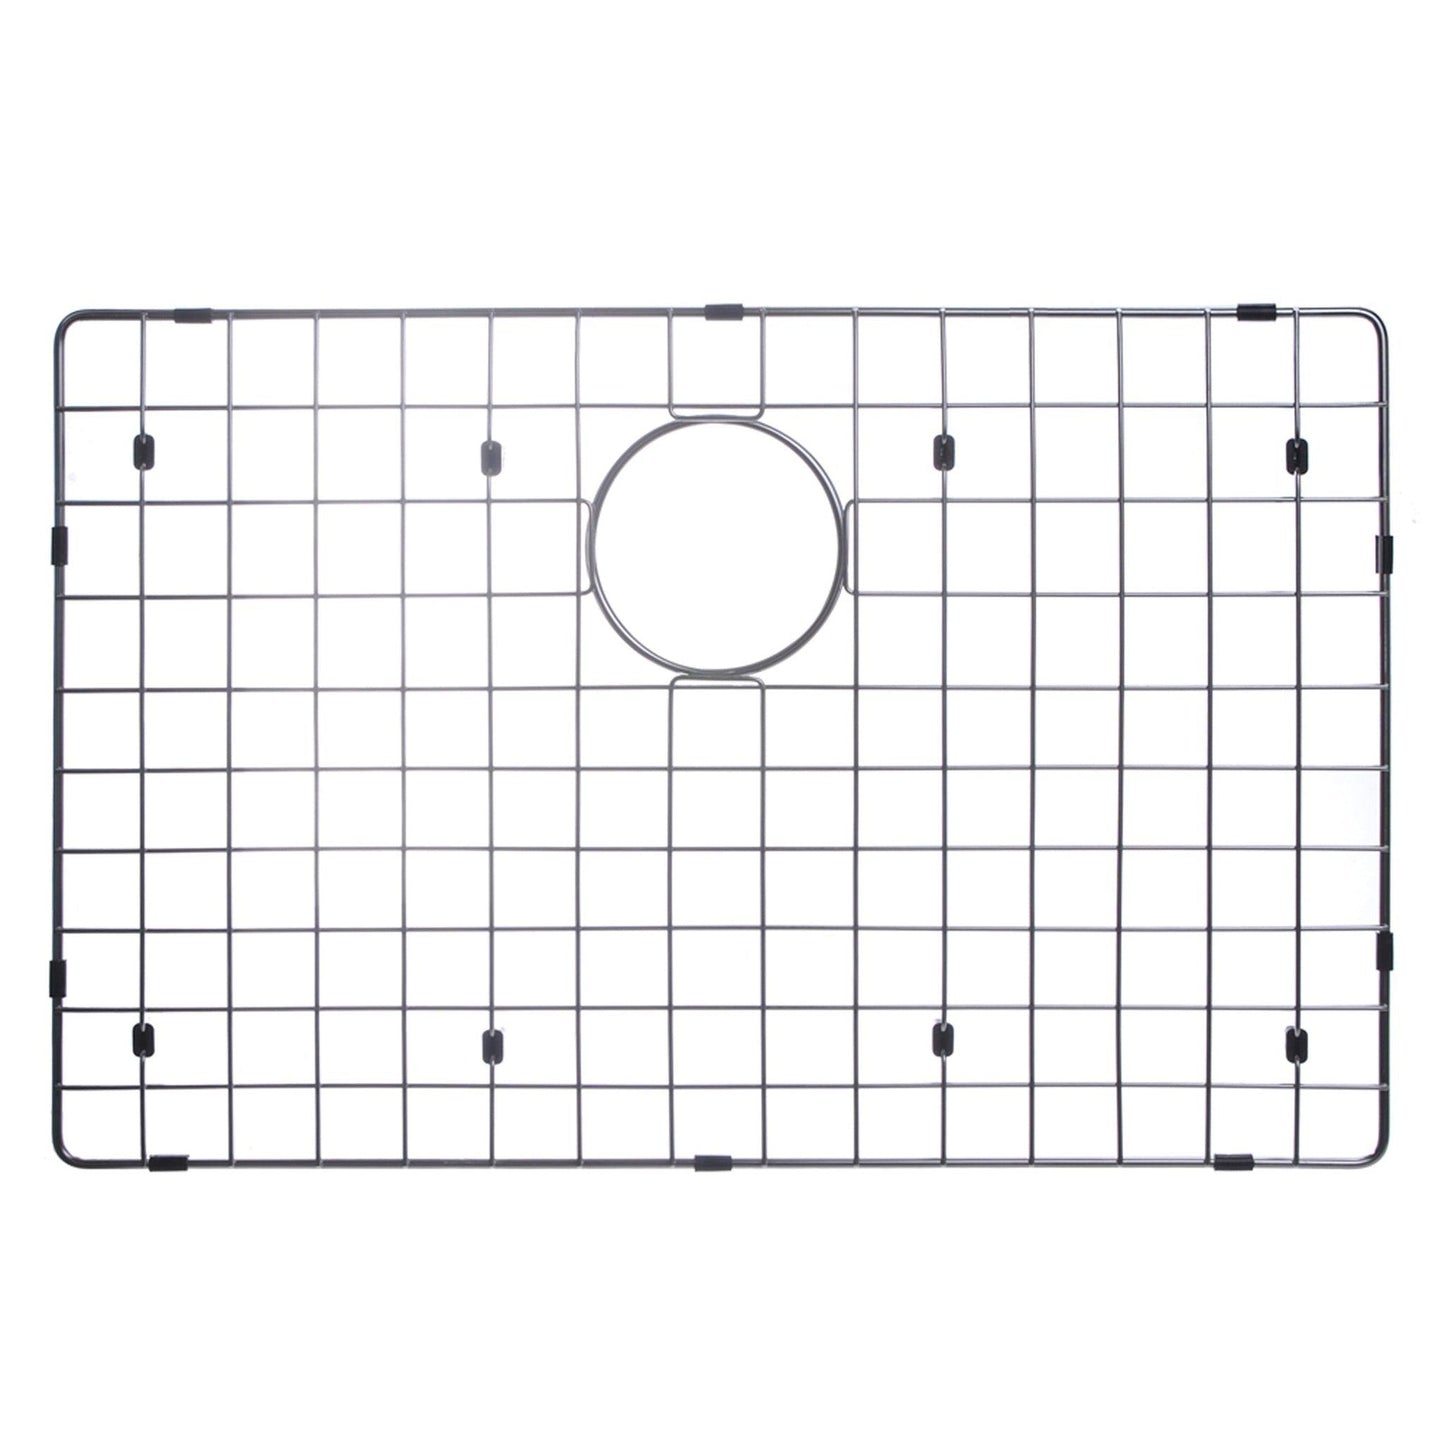 Water Creation Zero Radius Single Bowl Stainless Steel Hand Made Apron Front 30 Inch X 22 Inch Sink With Drain, Strainer, And Bottom Grid